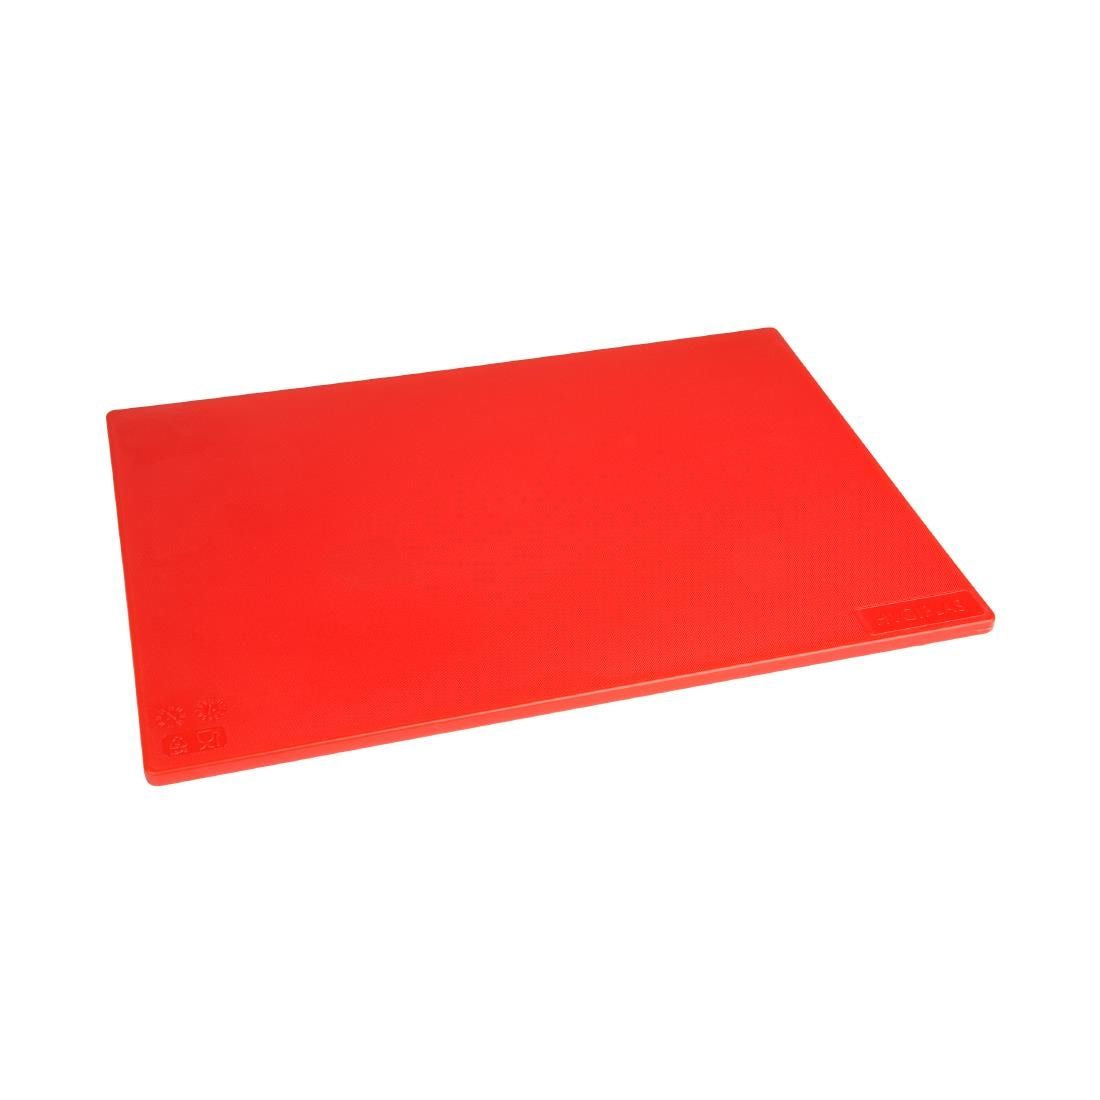 Hygiplas Anti-bacterial Low Density Chopping Board Red JD Catering Equipment Solutions Ltd